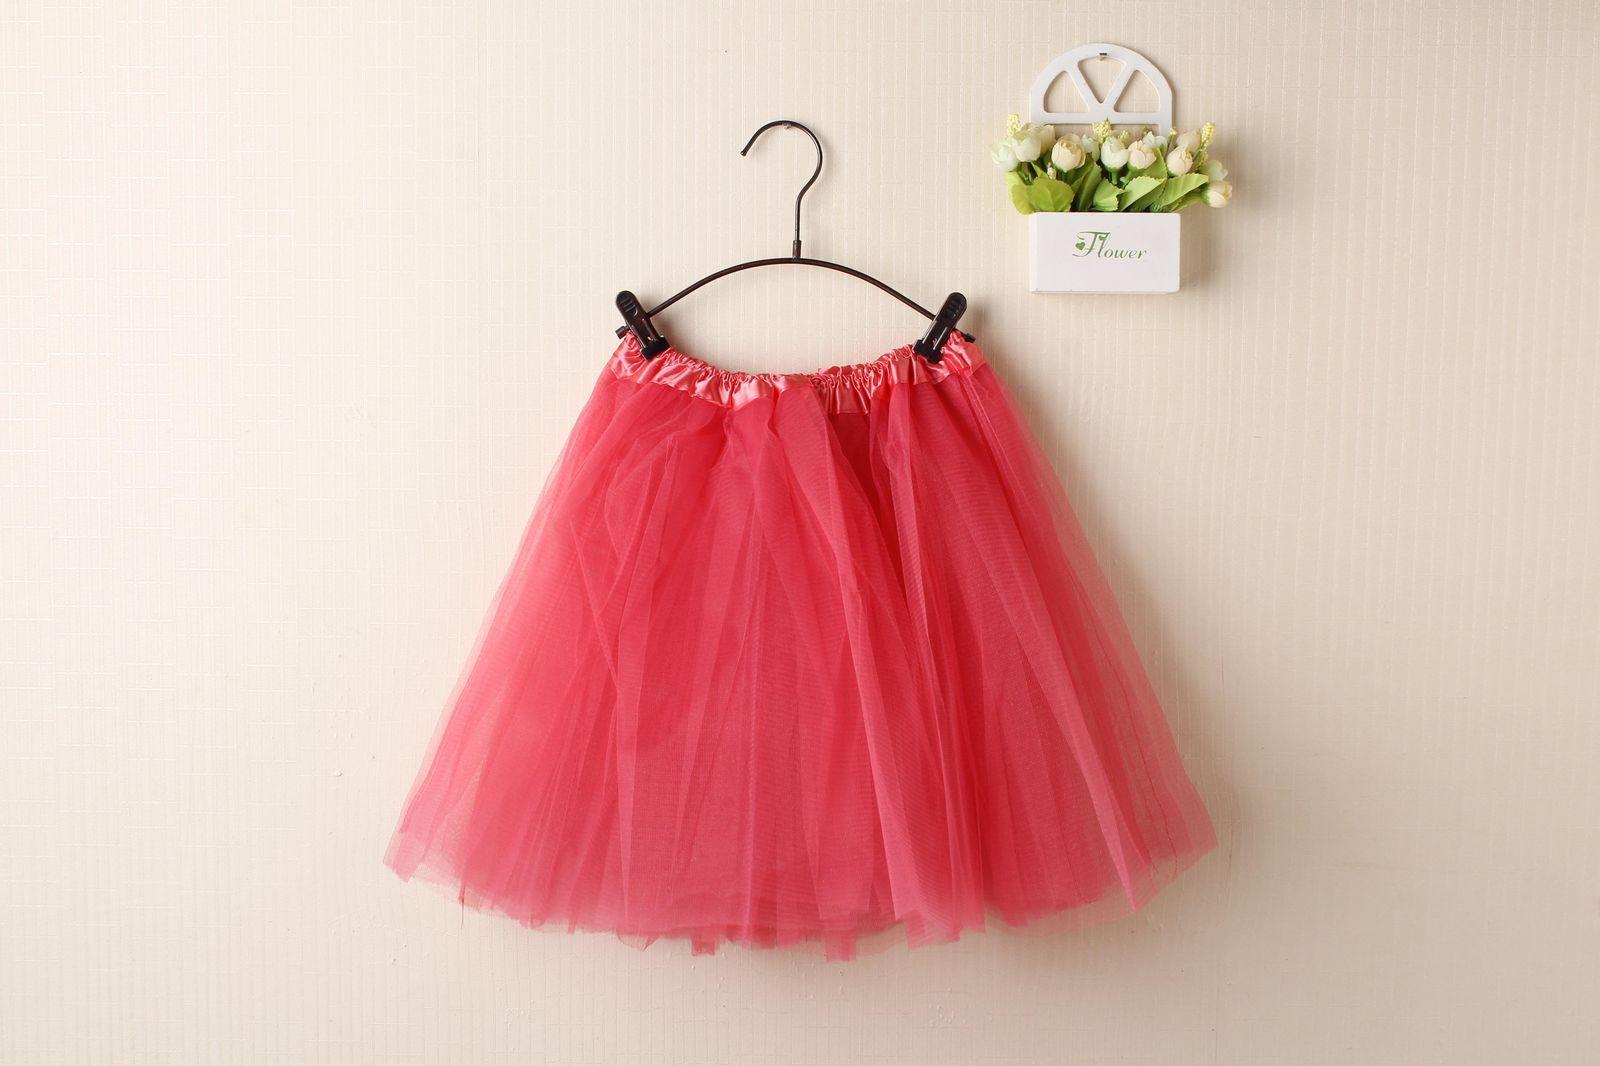 New Adults Tulle Tutu Skirt Dressup Party Costume Ballet Womens Girls Dance Wear - Watermelon Red (Size: Kids)